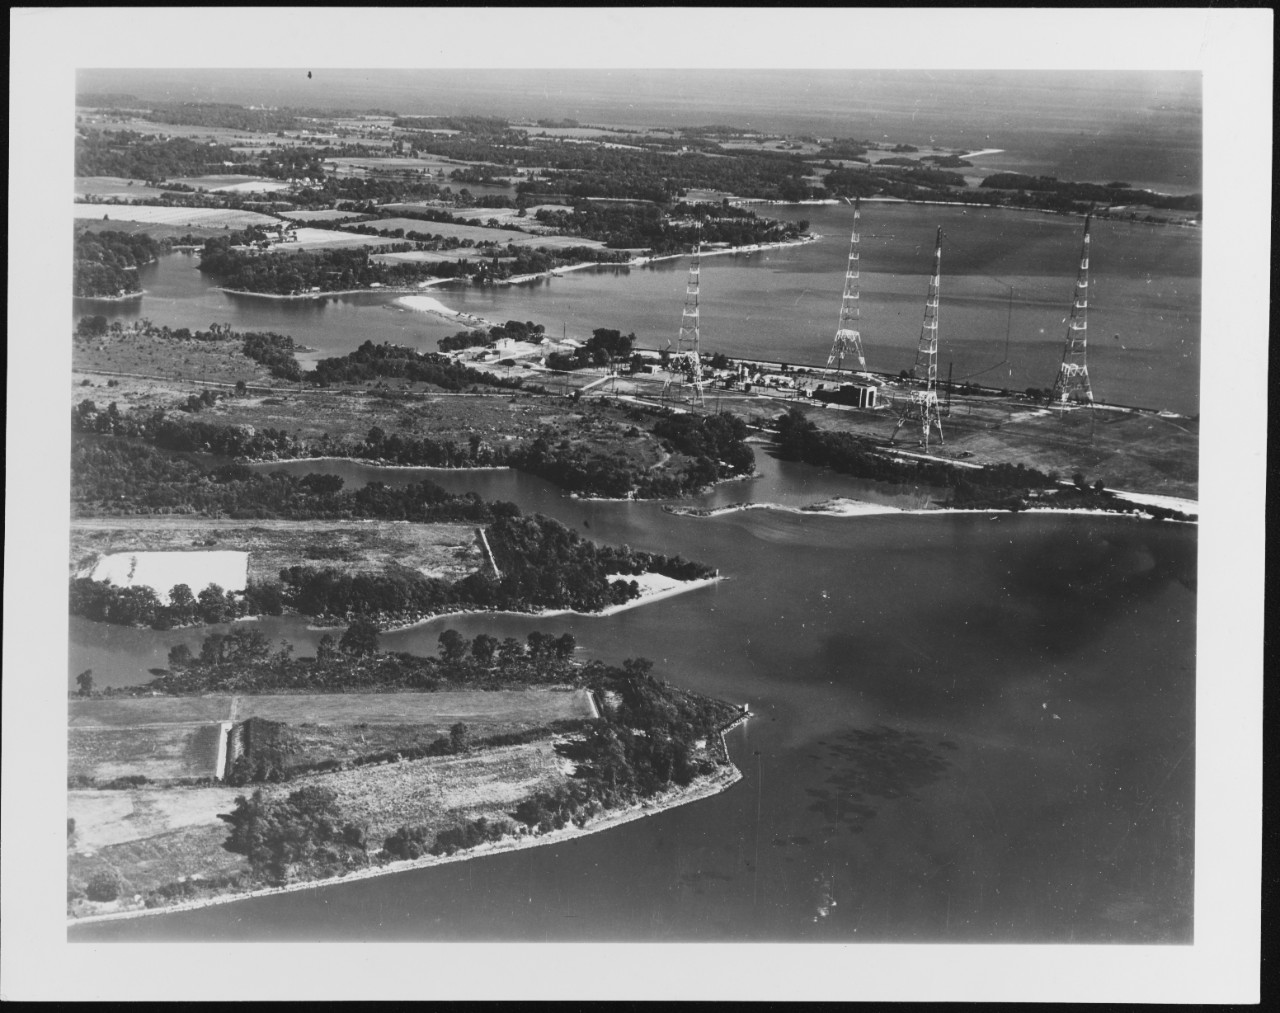 Aerial view of U.S. Naval Air Station, Anacostia, Washington, D.C. Naval Academy Rifle Range and portion of high power radio station, looking East. Altitude 1000 feet, FL 25 cm